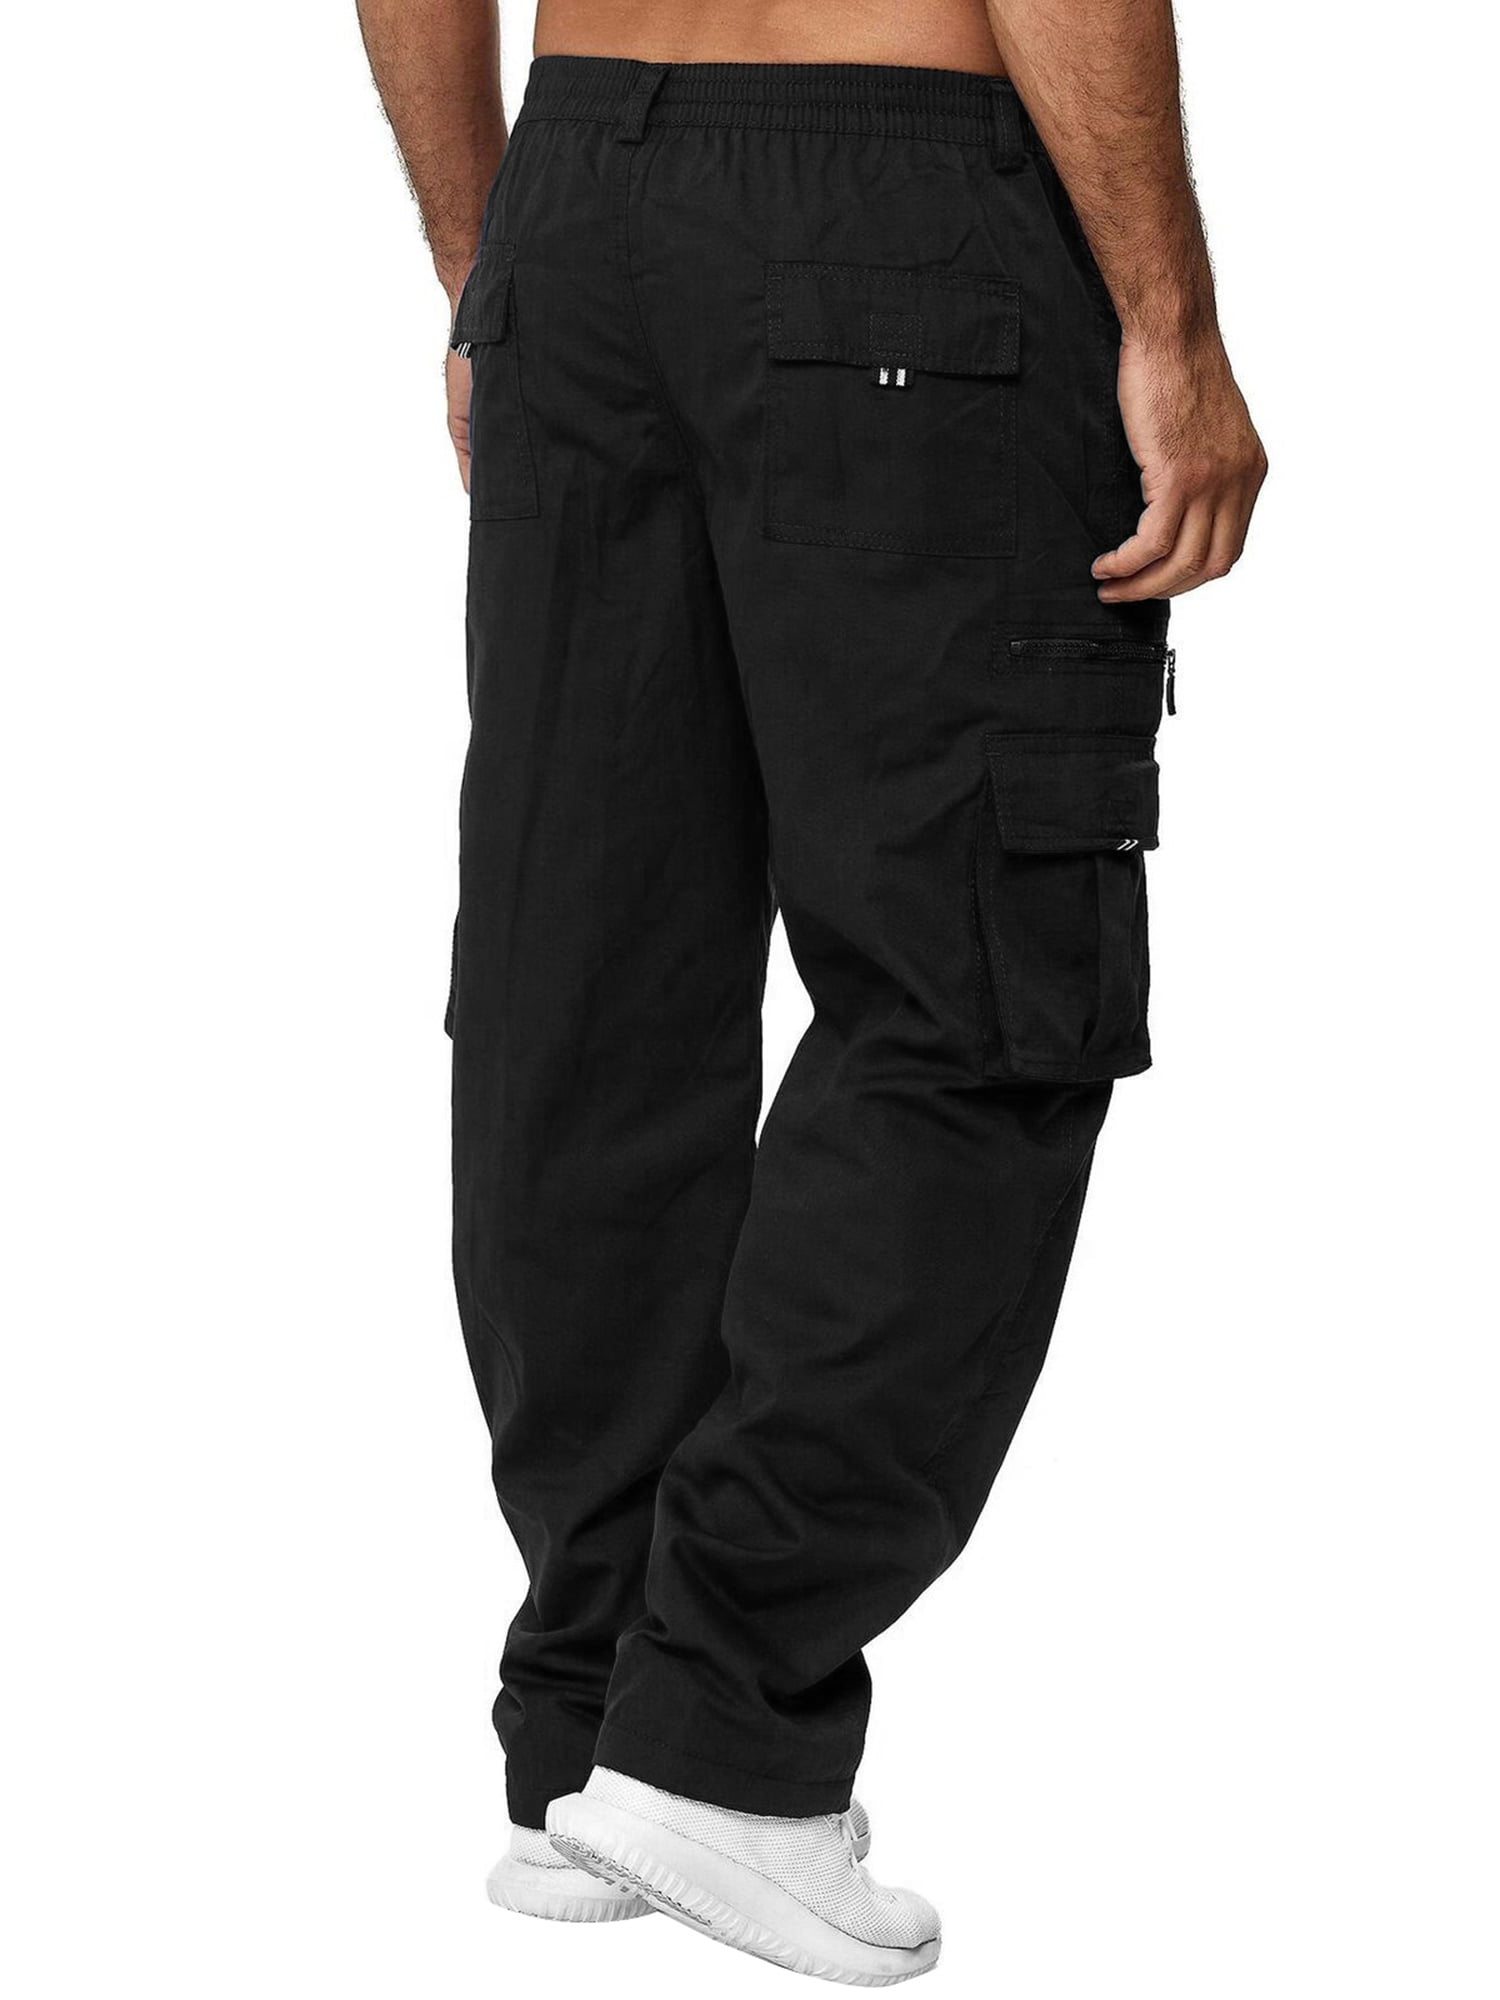 Buy Regular Fit Cotton Men Casual Cargo Pant New Style Online In India At  Discounted Prices